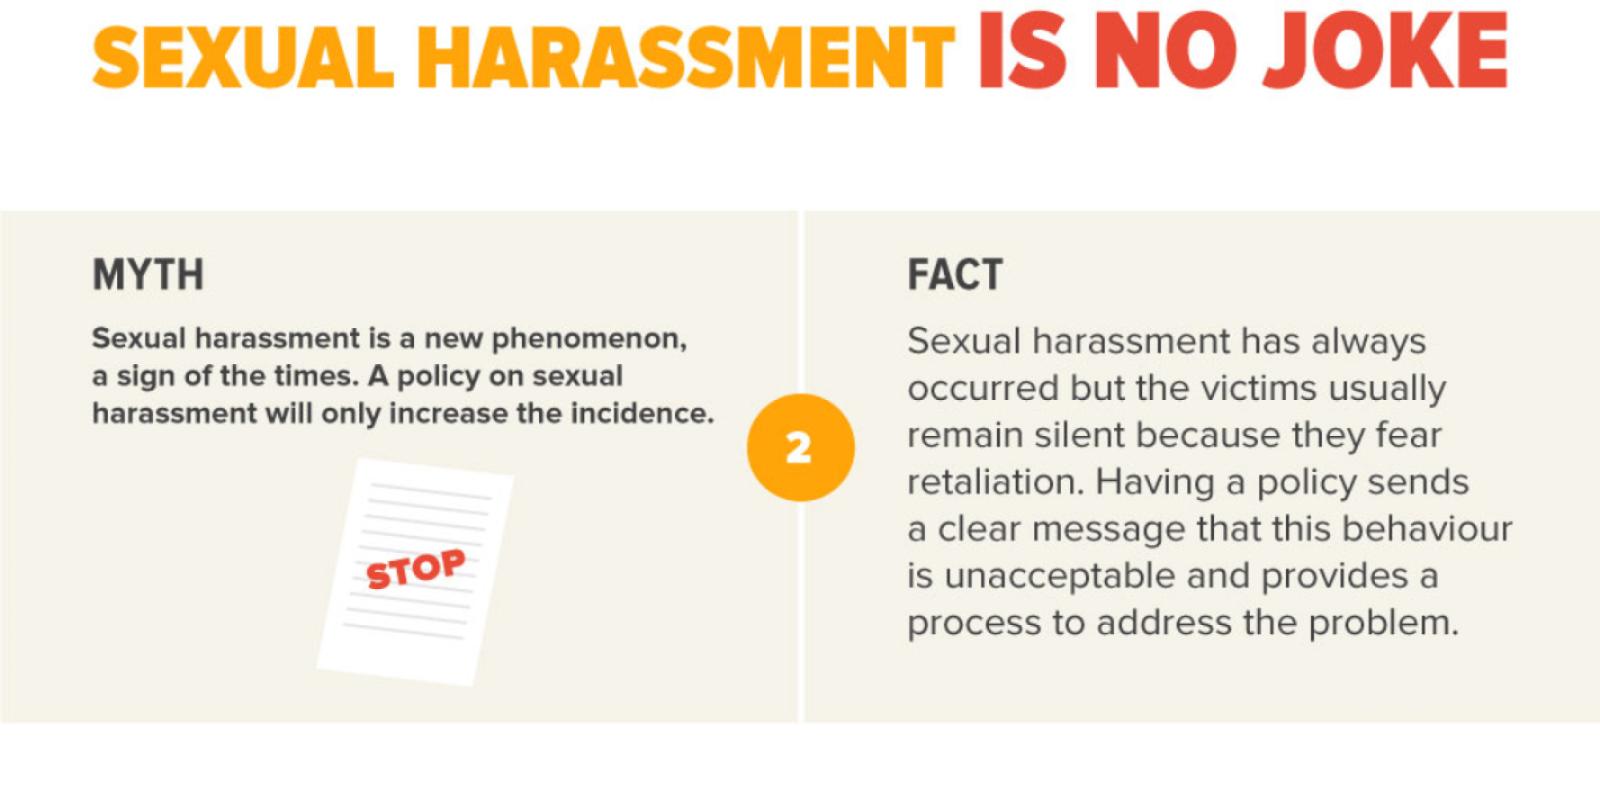 MYTH Sexual harassment is a new phenomenon, a sign of the times. A policy on sexual harassment will only increase the incidence.  FACT Sexual harassment has always occurred but the victims usually remain silent because they fear retaliation. Having a policy sends a clear message that this behaviour is unacceptable and provides a process to address the problem.